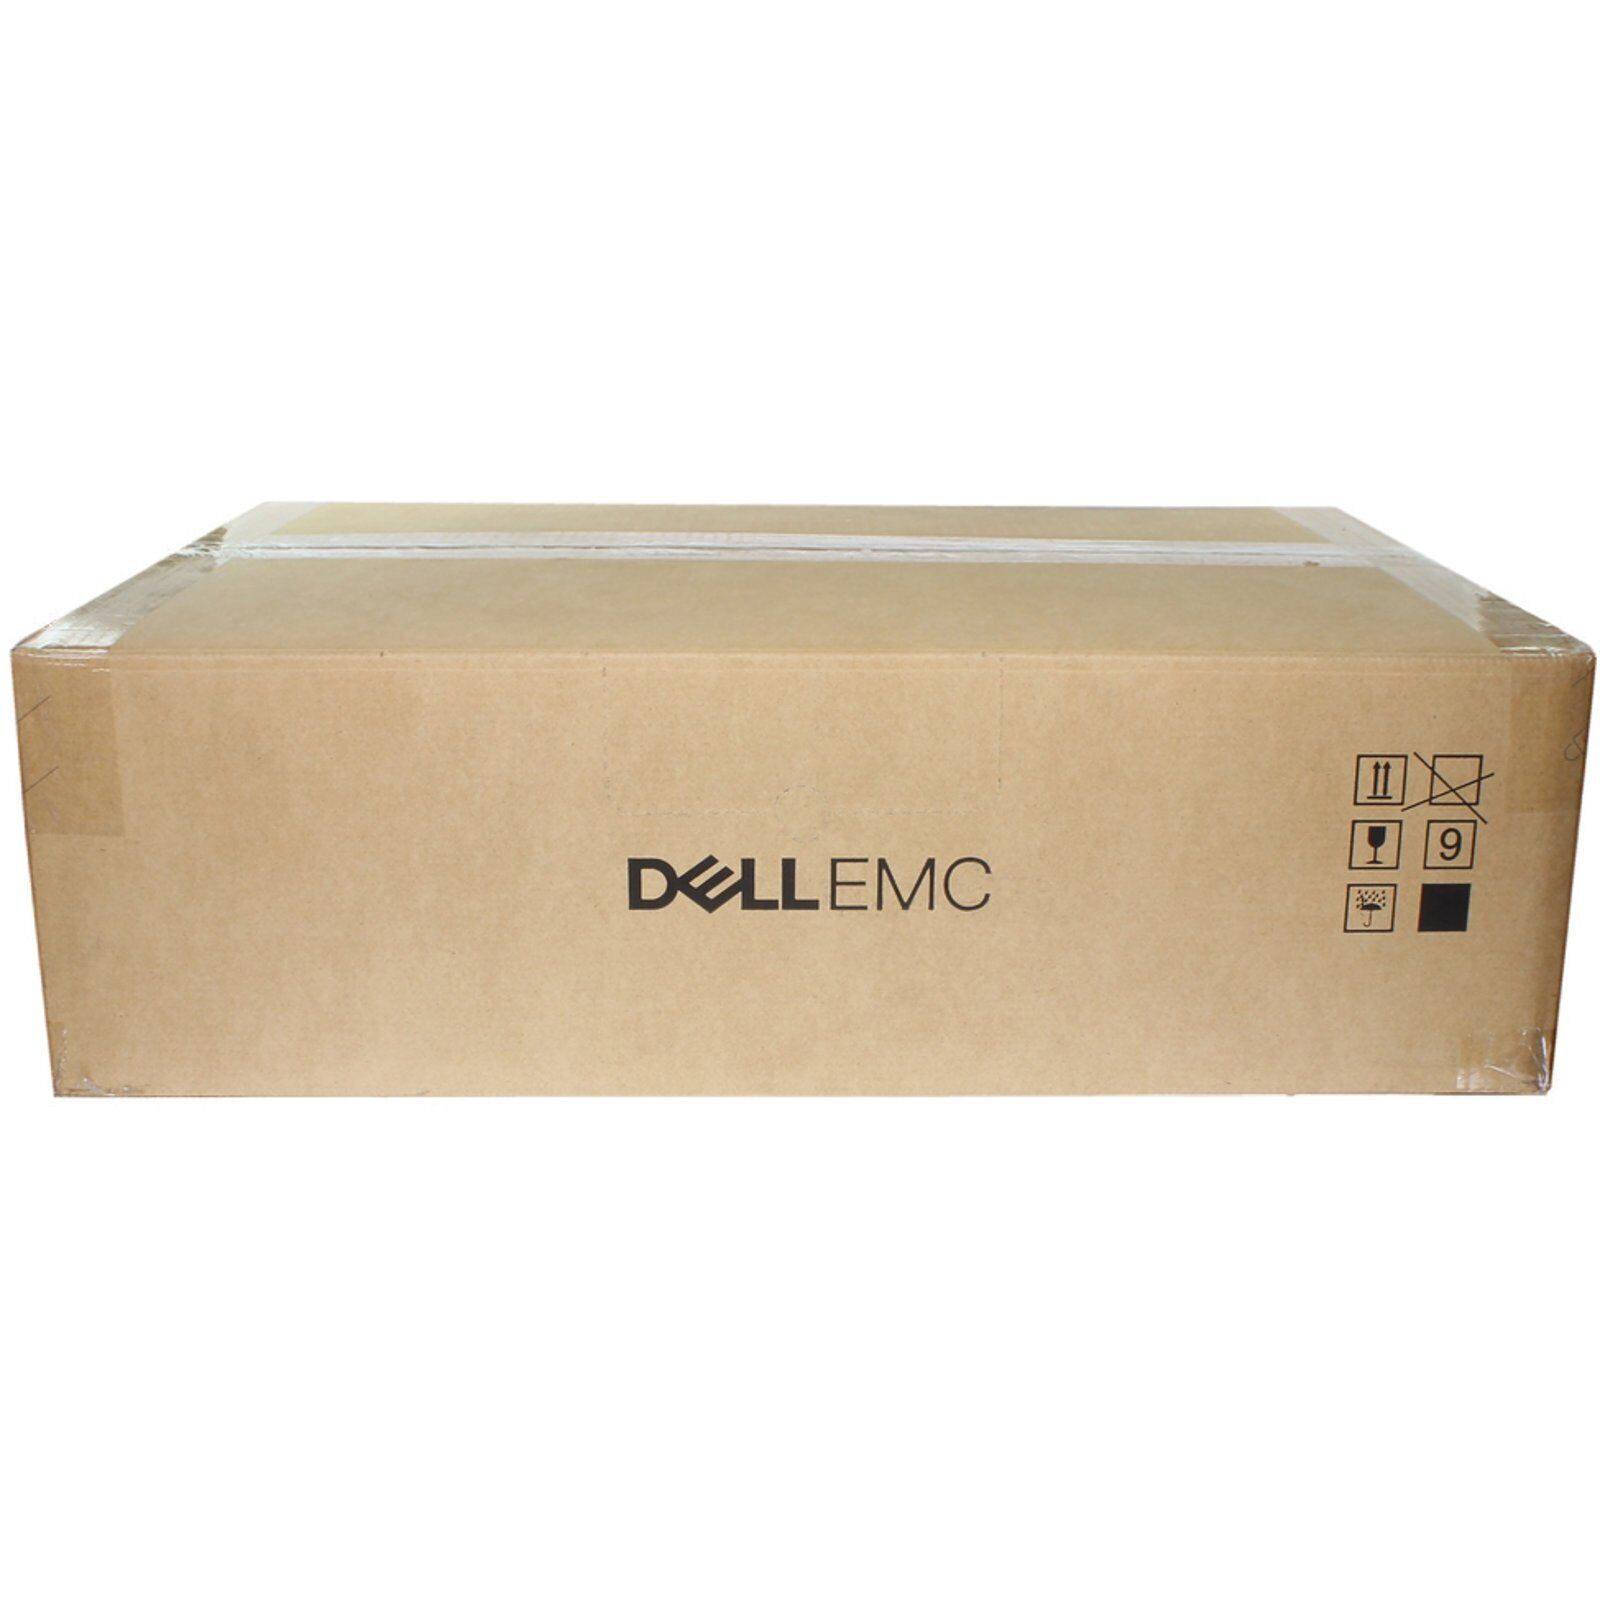 Dell Networking S3048-ON 48P 1GbE 4P SFP+ PSU to I/O Switch (NOB)